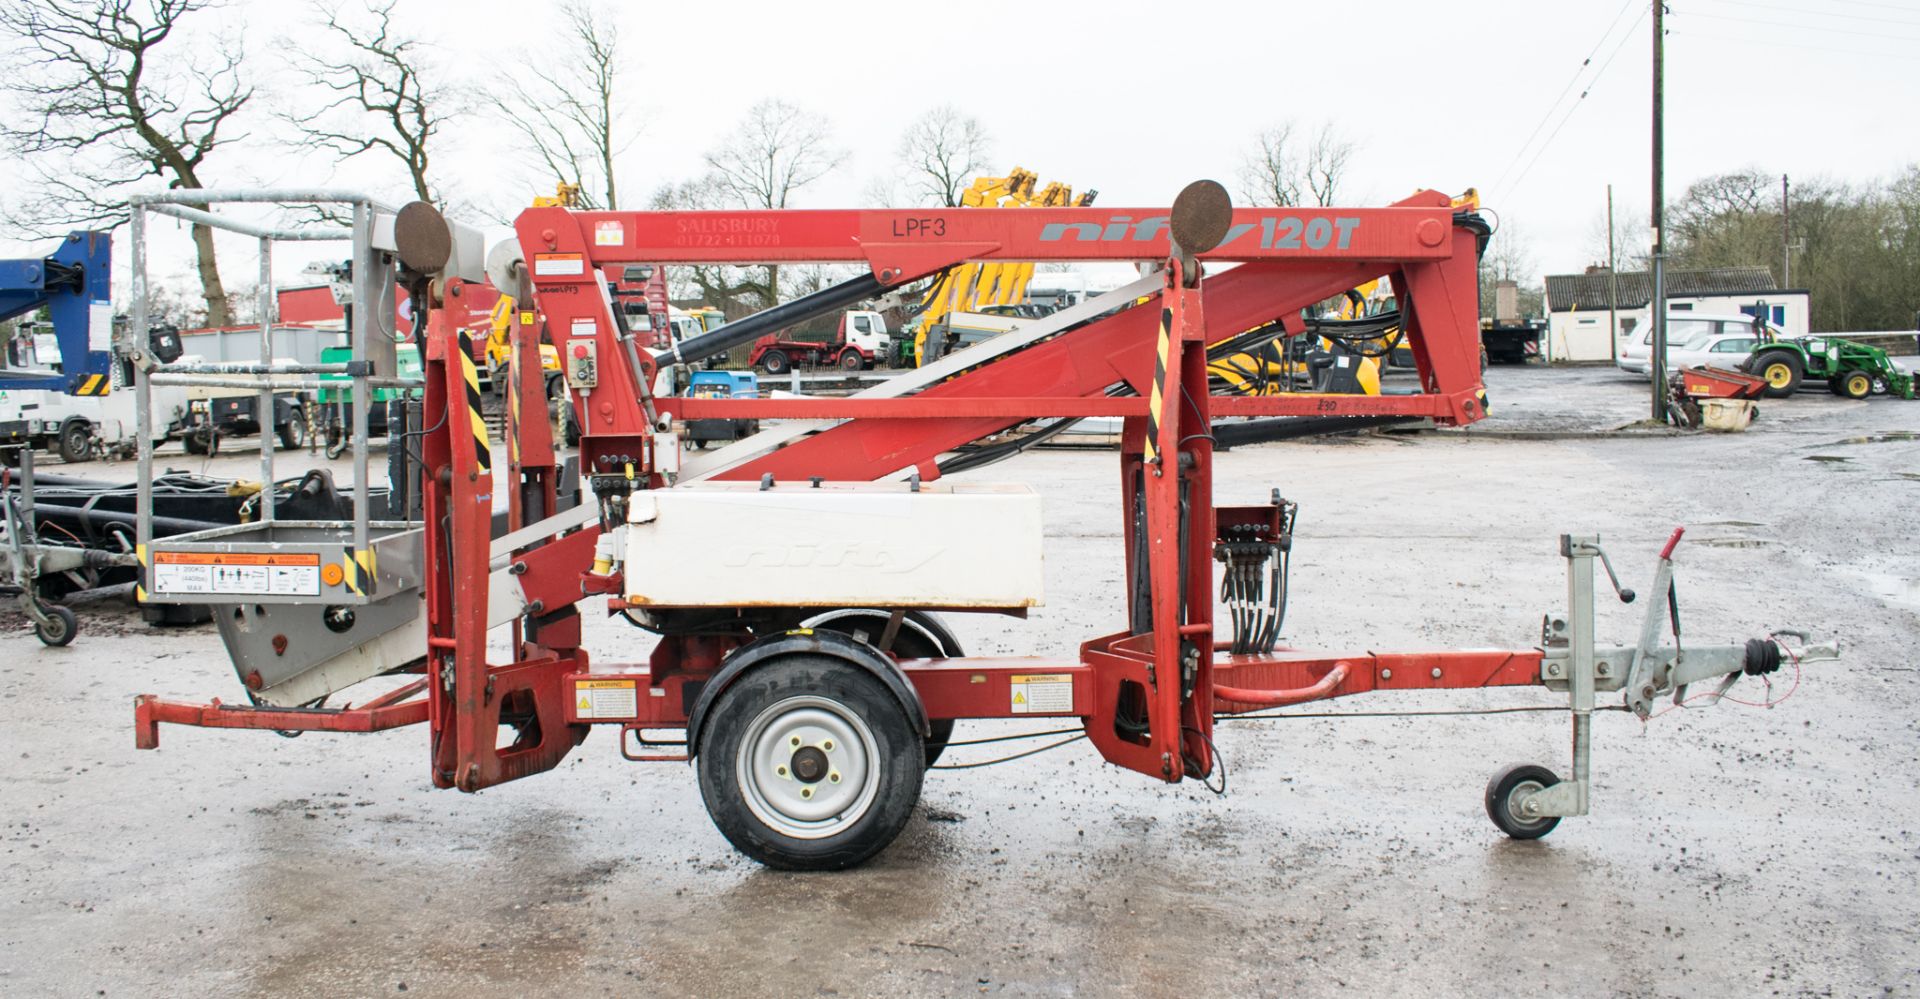 Nifty 120 TE fast tow articulated boom lift access platform Year: 2005 S/N: 0413653 WOOLPF3 - Image 5 of 9